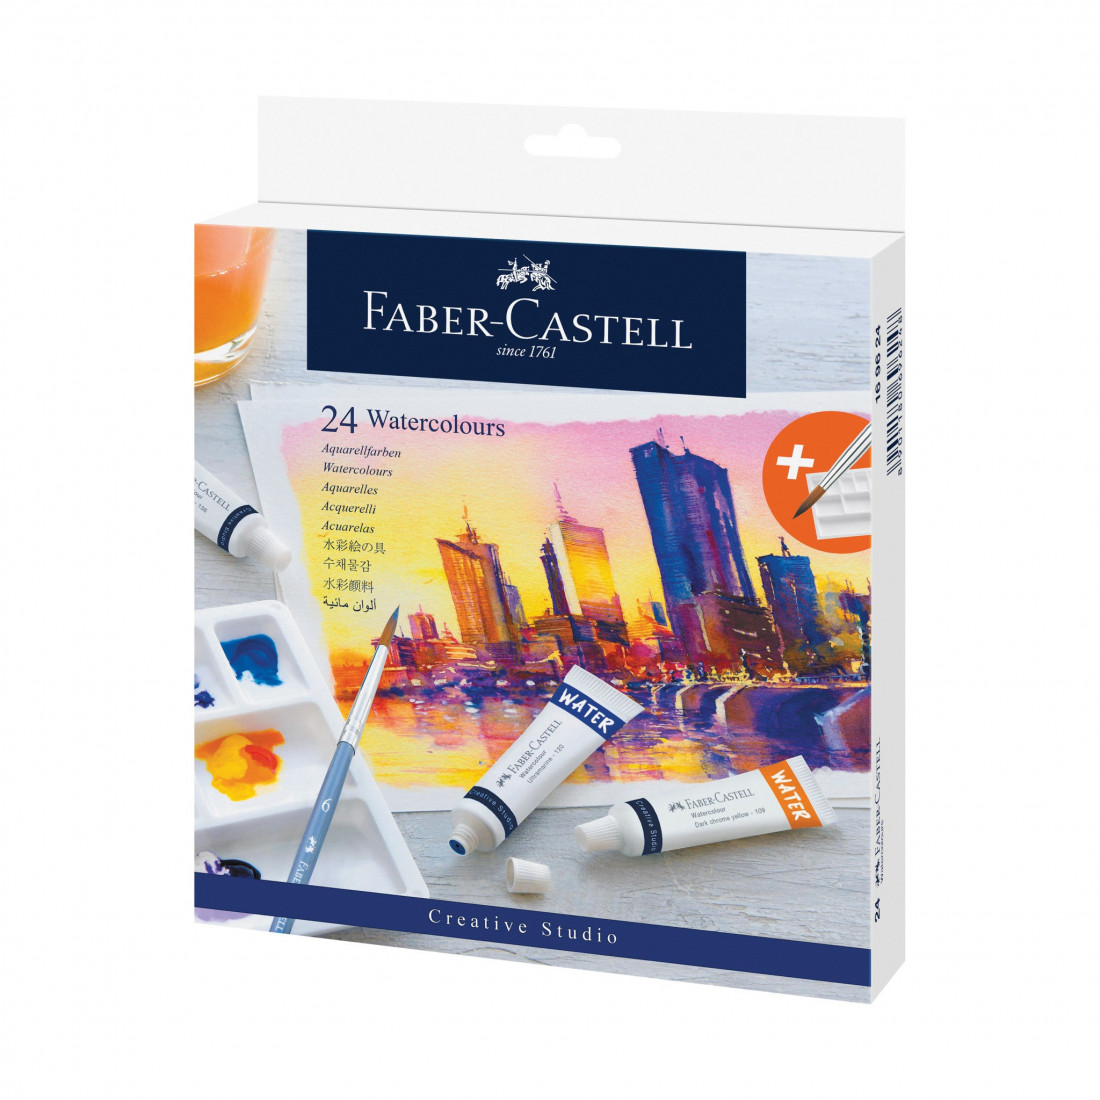 Faber Castell Watercolours box of 24 169624